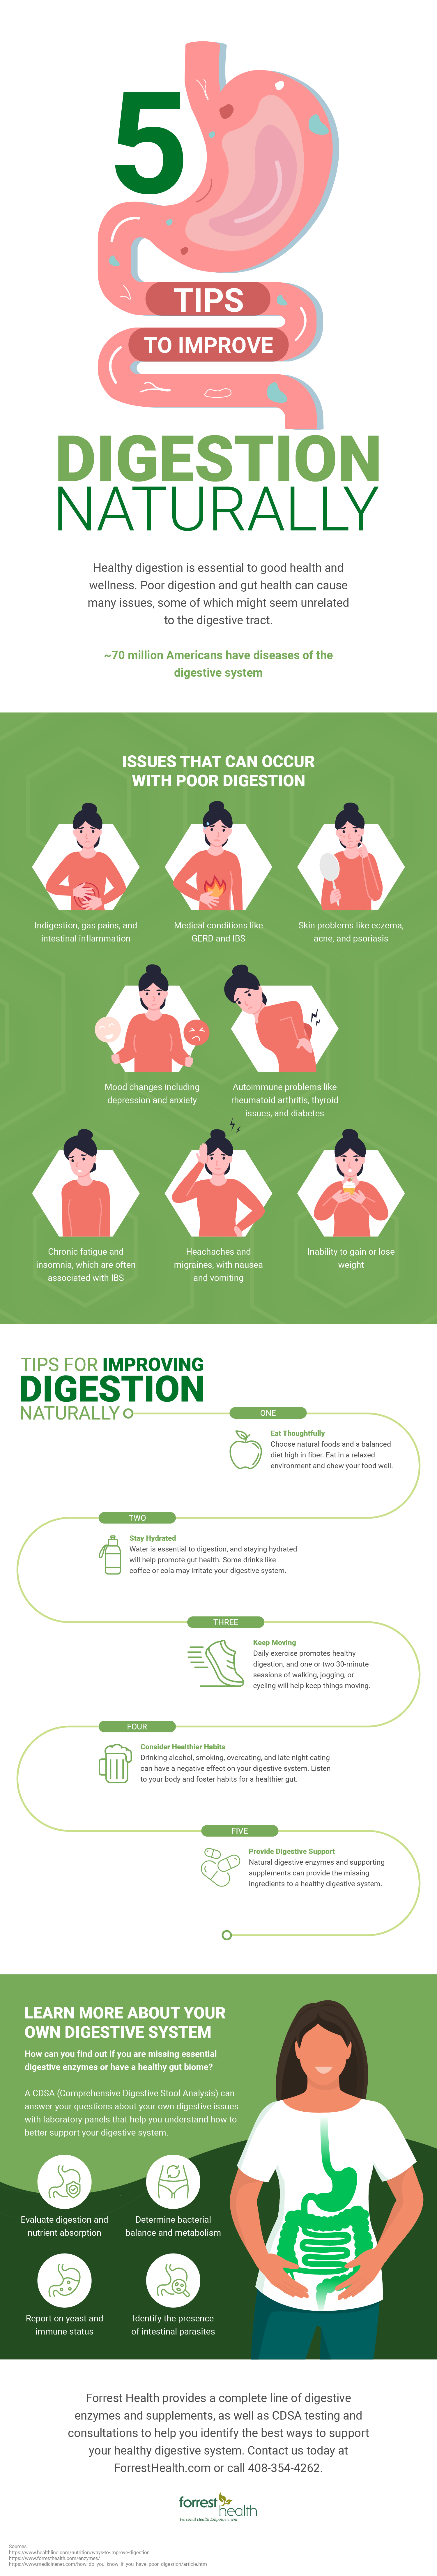 5 Tips to Improve Digestion Naturally Infographic